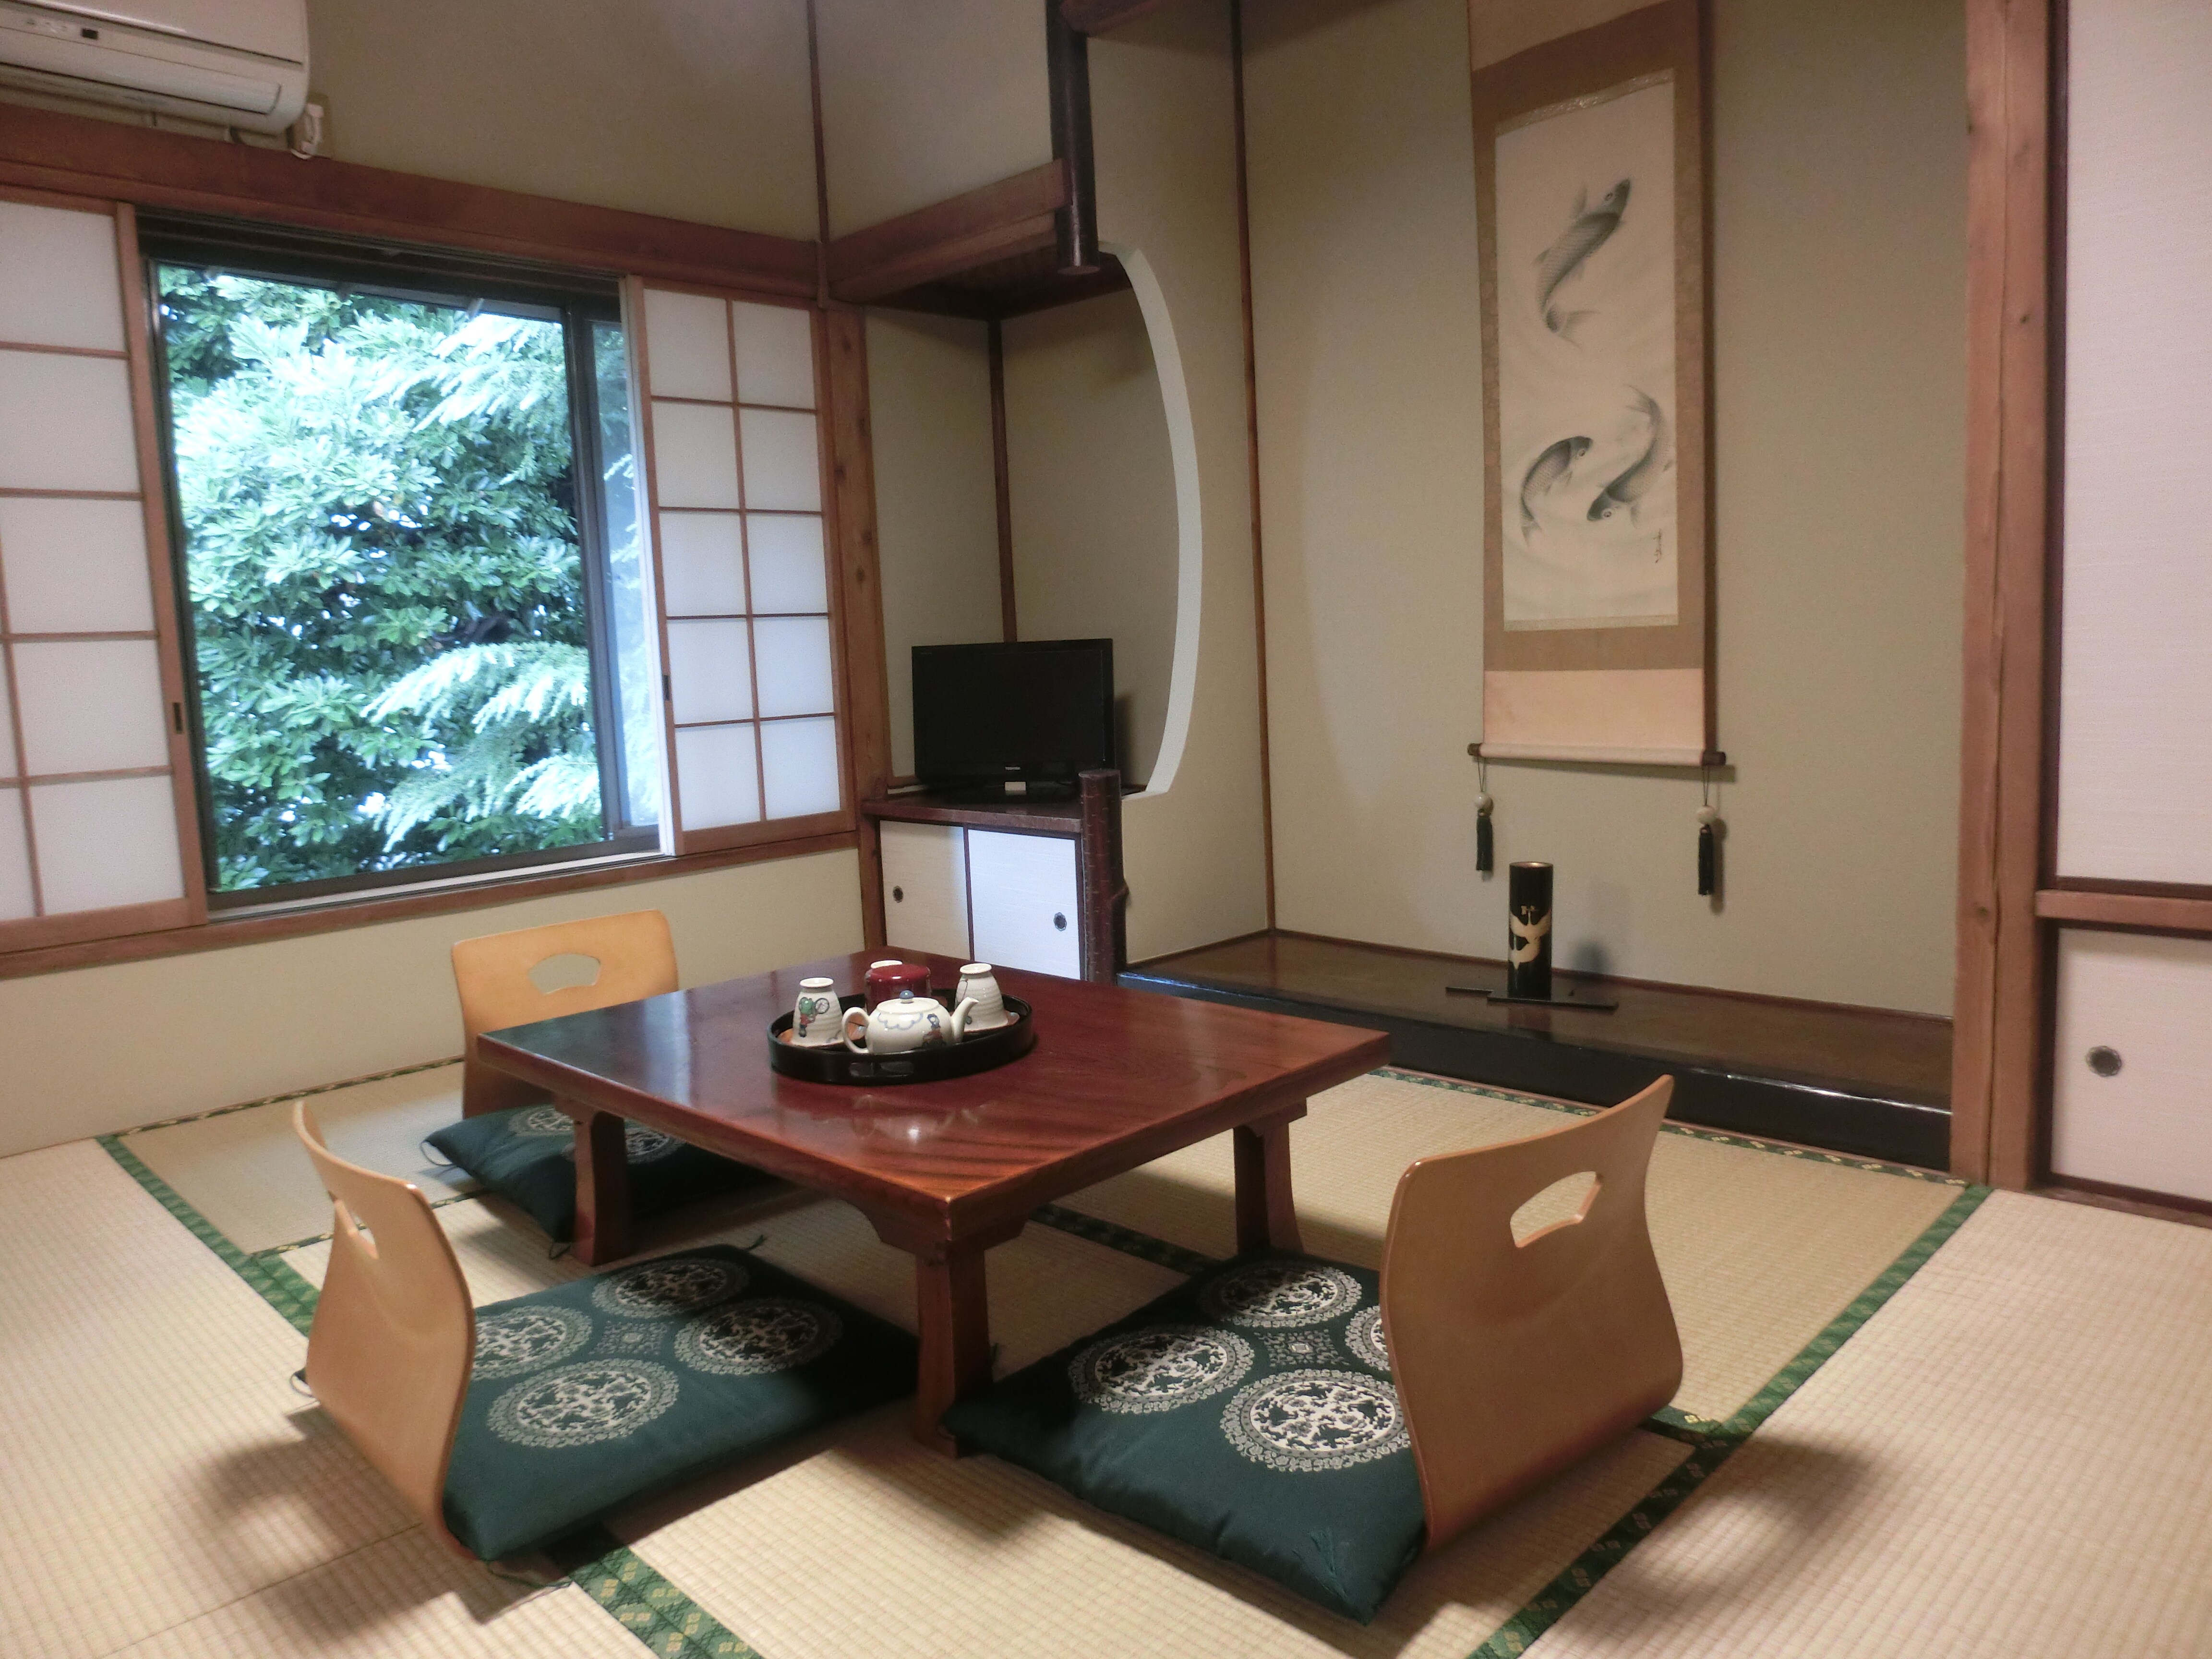 [Akizuki no Ma] 6 tatami mats and 8 tatami mats in the back, 2nd floor, spacious Japanese-style room with no adjacent rooms